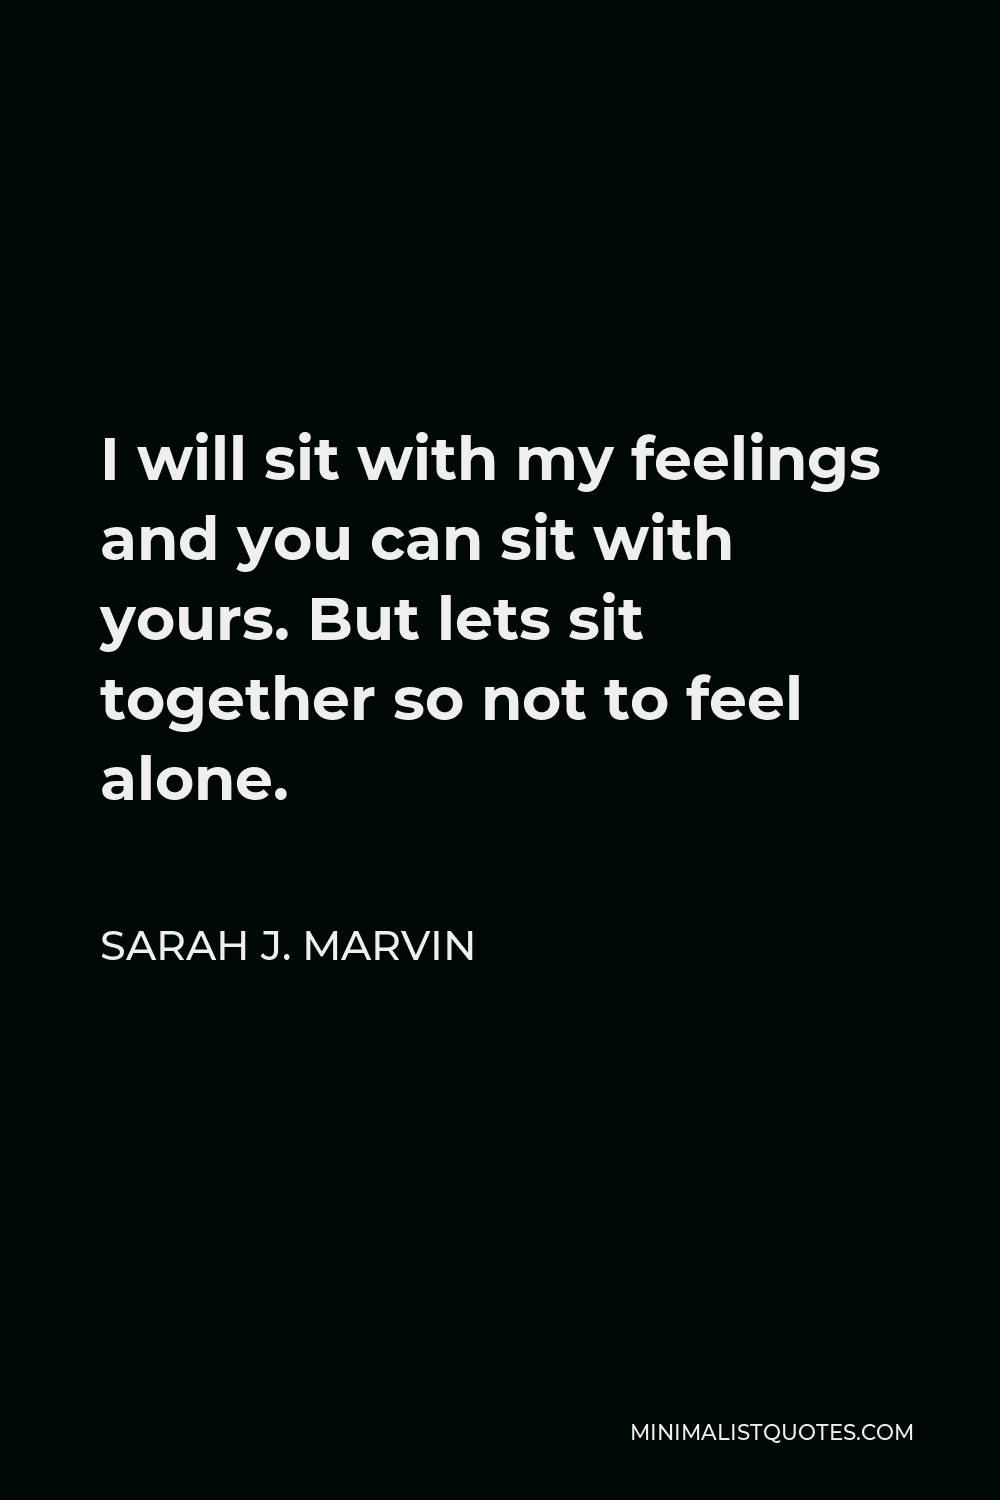 Sarah J. Marvin Quote: I will sit with my feelings and you can sit with ...